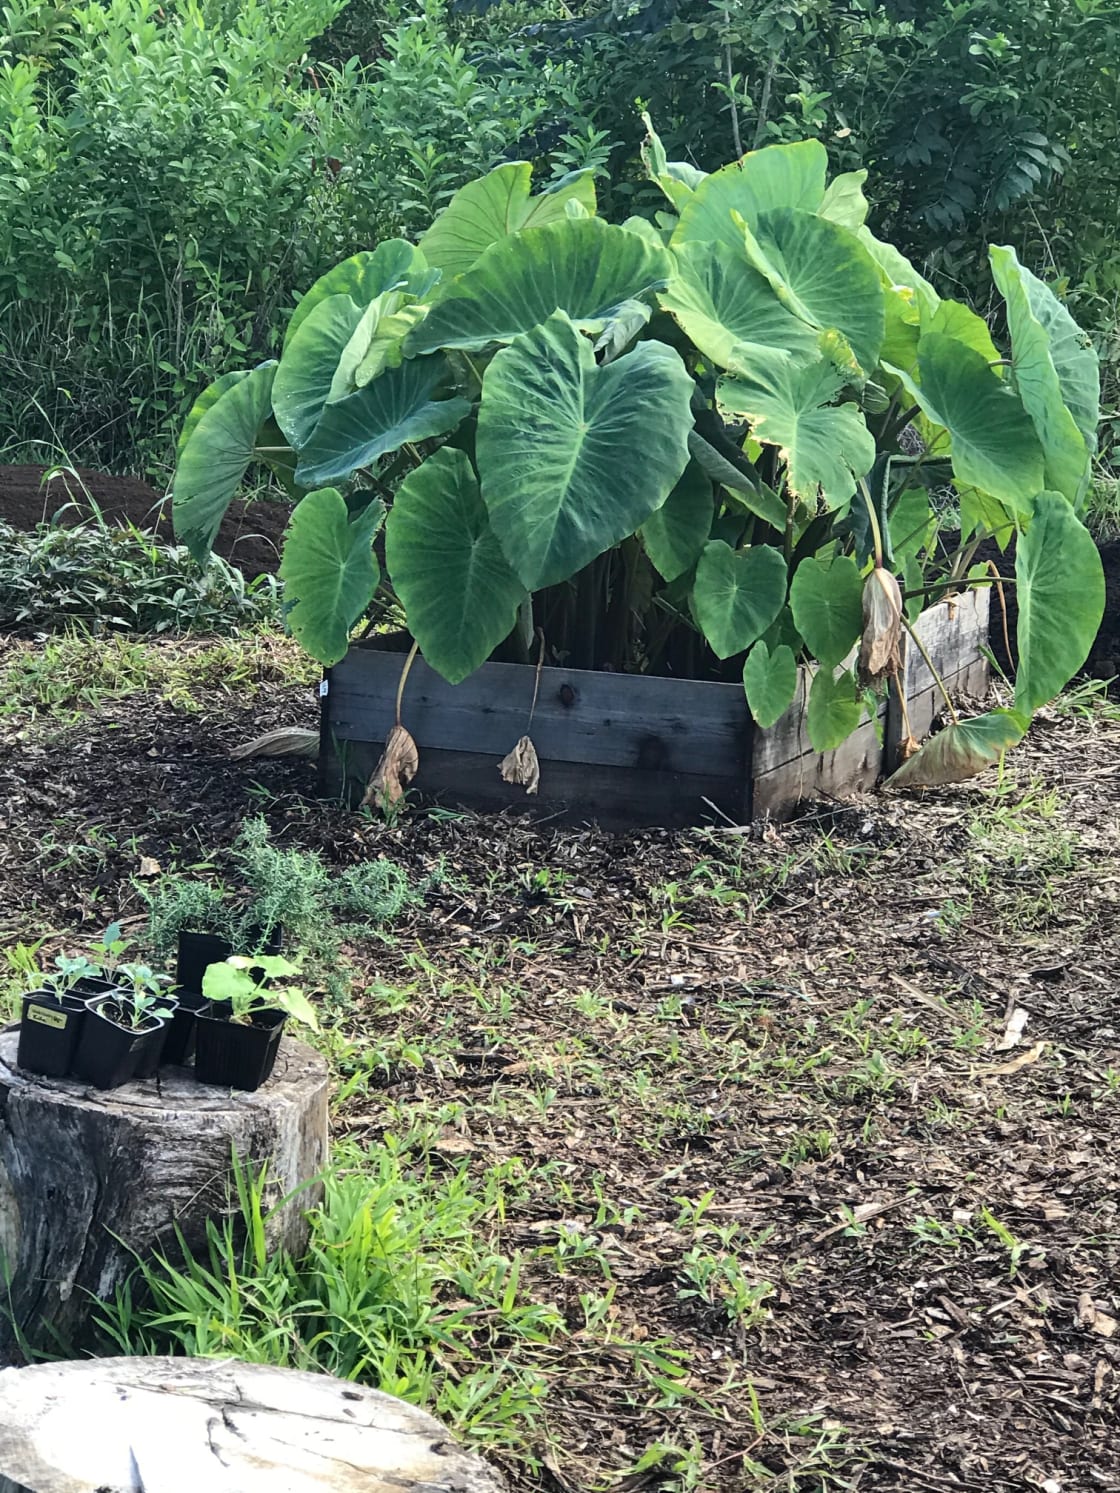 This is a photo of Taro, traditionally called Kalo, a plant who's root has been used by the native Hawaiian people as a everyday food source, as well as ceremonially for centuries.